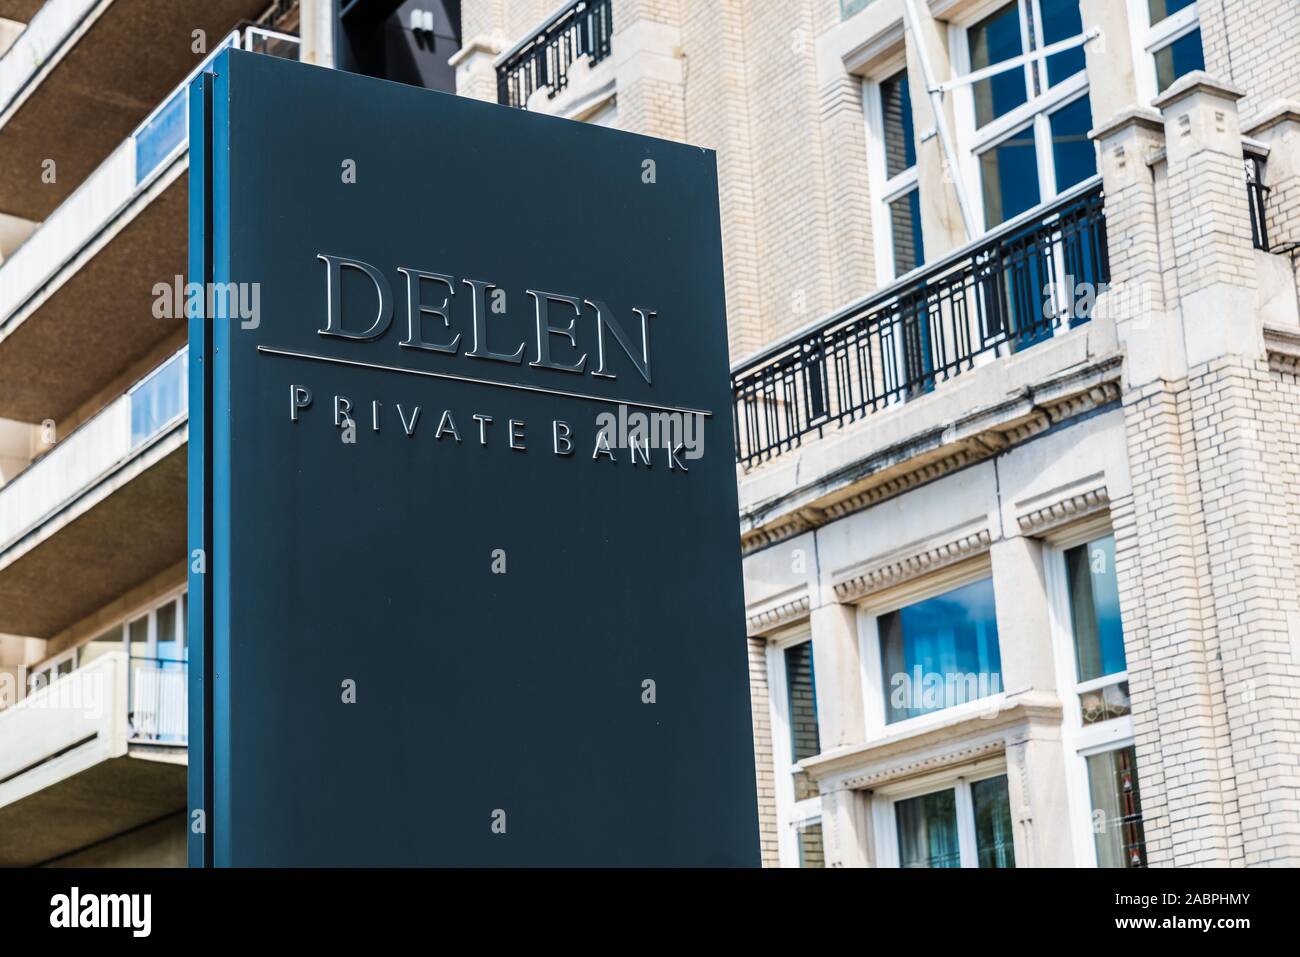 Brussels/ Belgium - 07 03 2019: Facade and sign of the Delen Private banking company Stock Photo